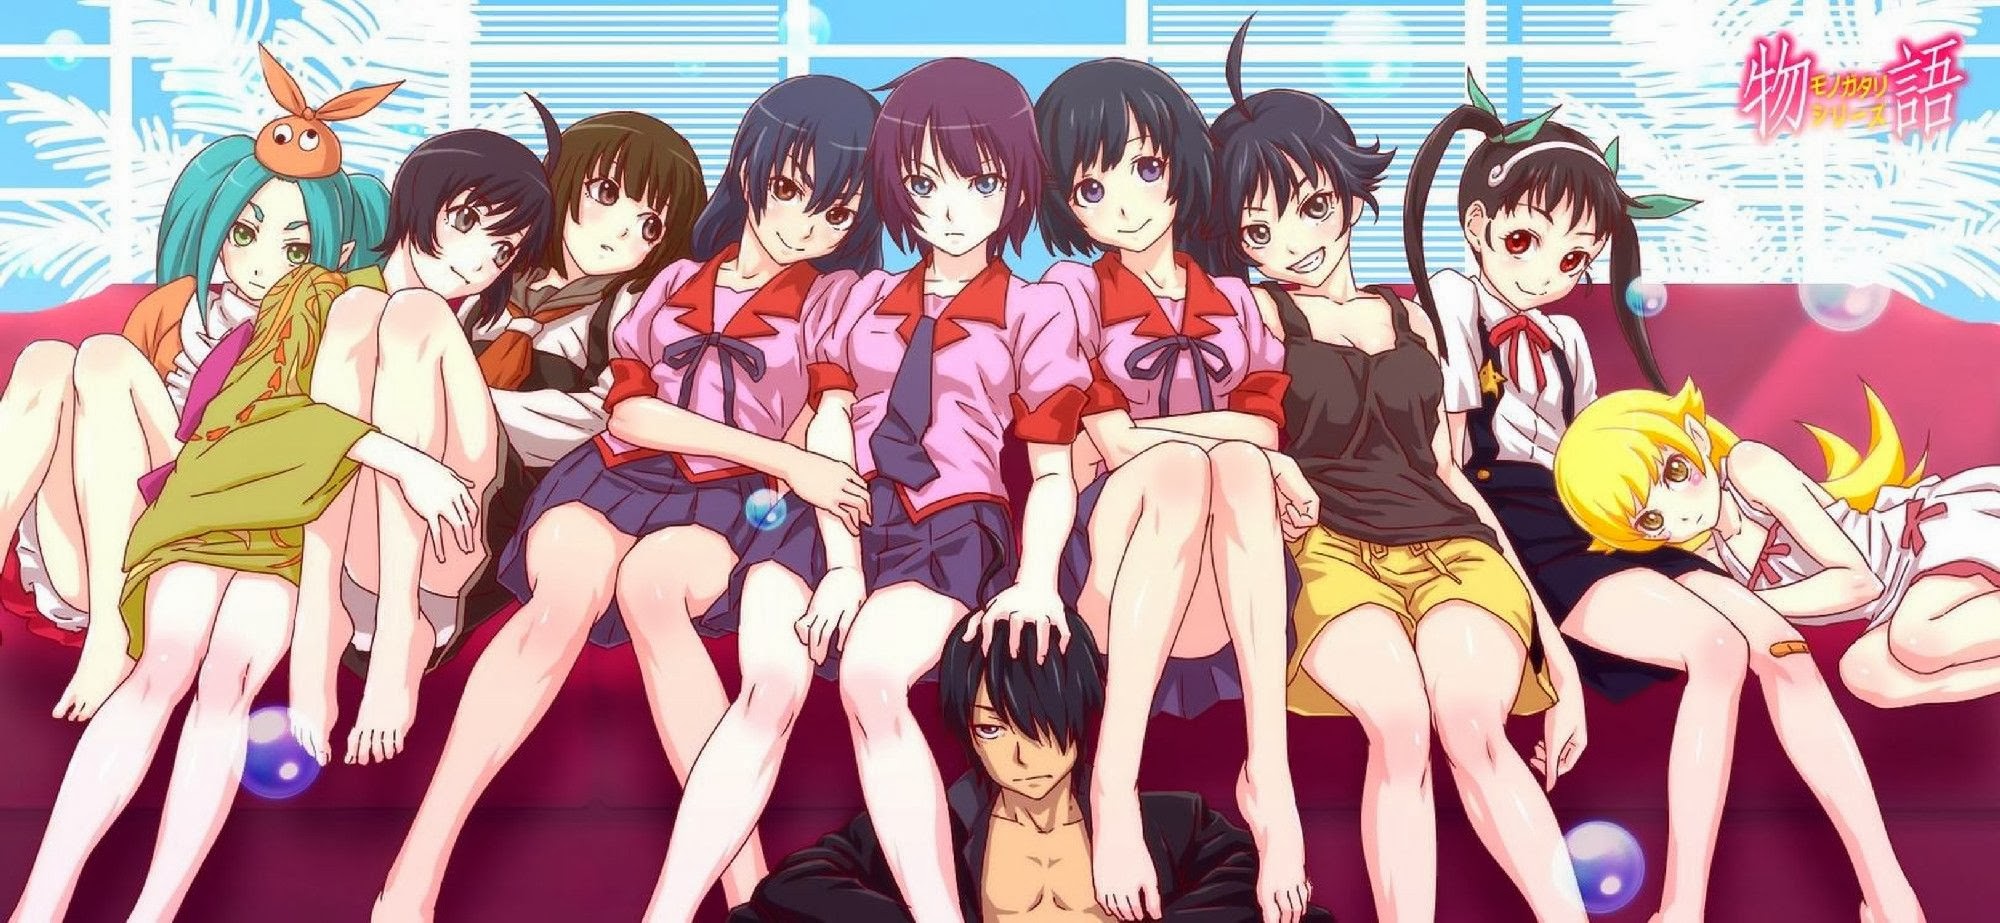 Harem ending as far as I'm concerned. It's a harem ending to me. I will not  go by some crappy ending that ruined the friendships and love these girls  and fuu all